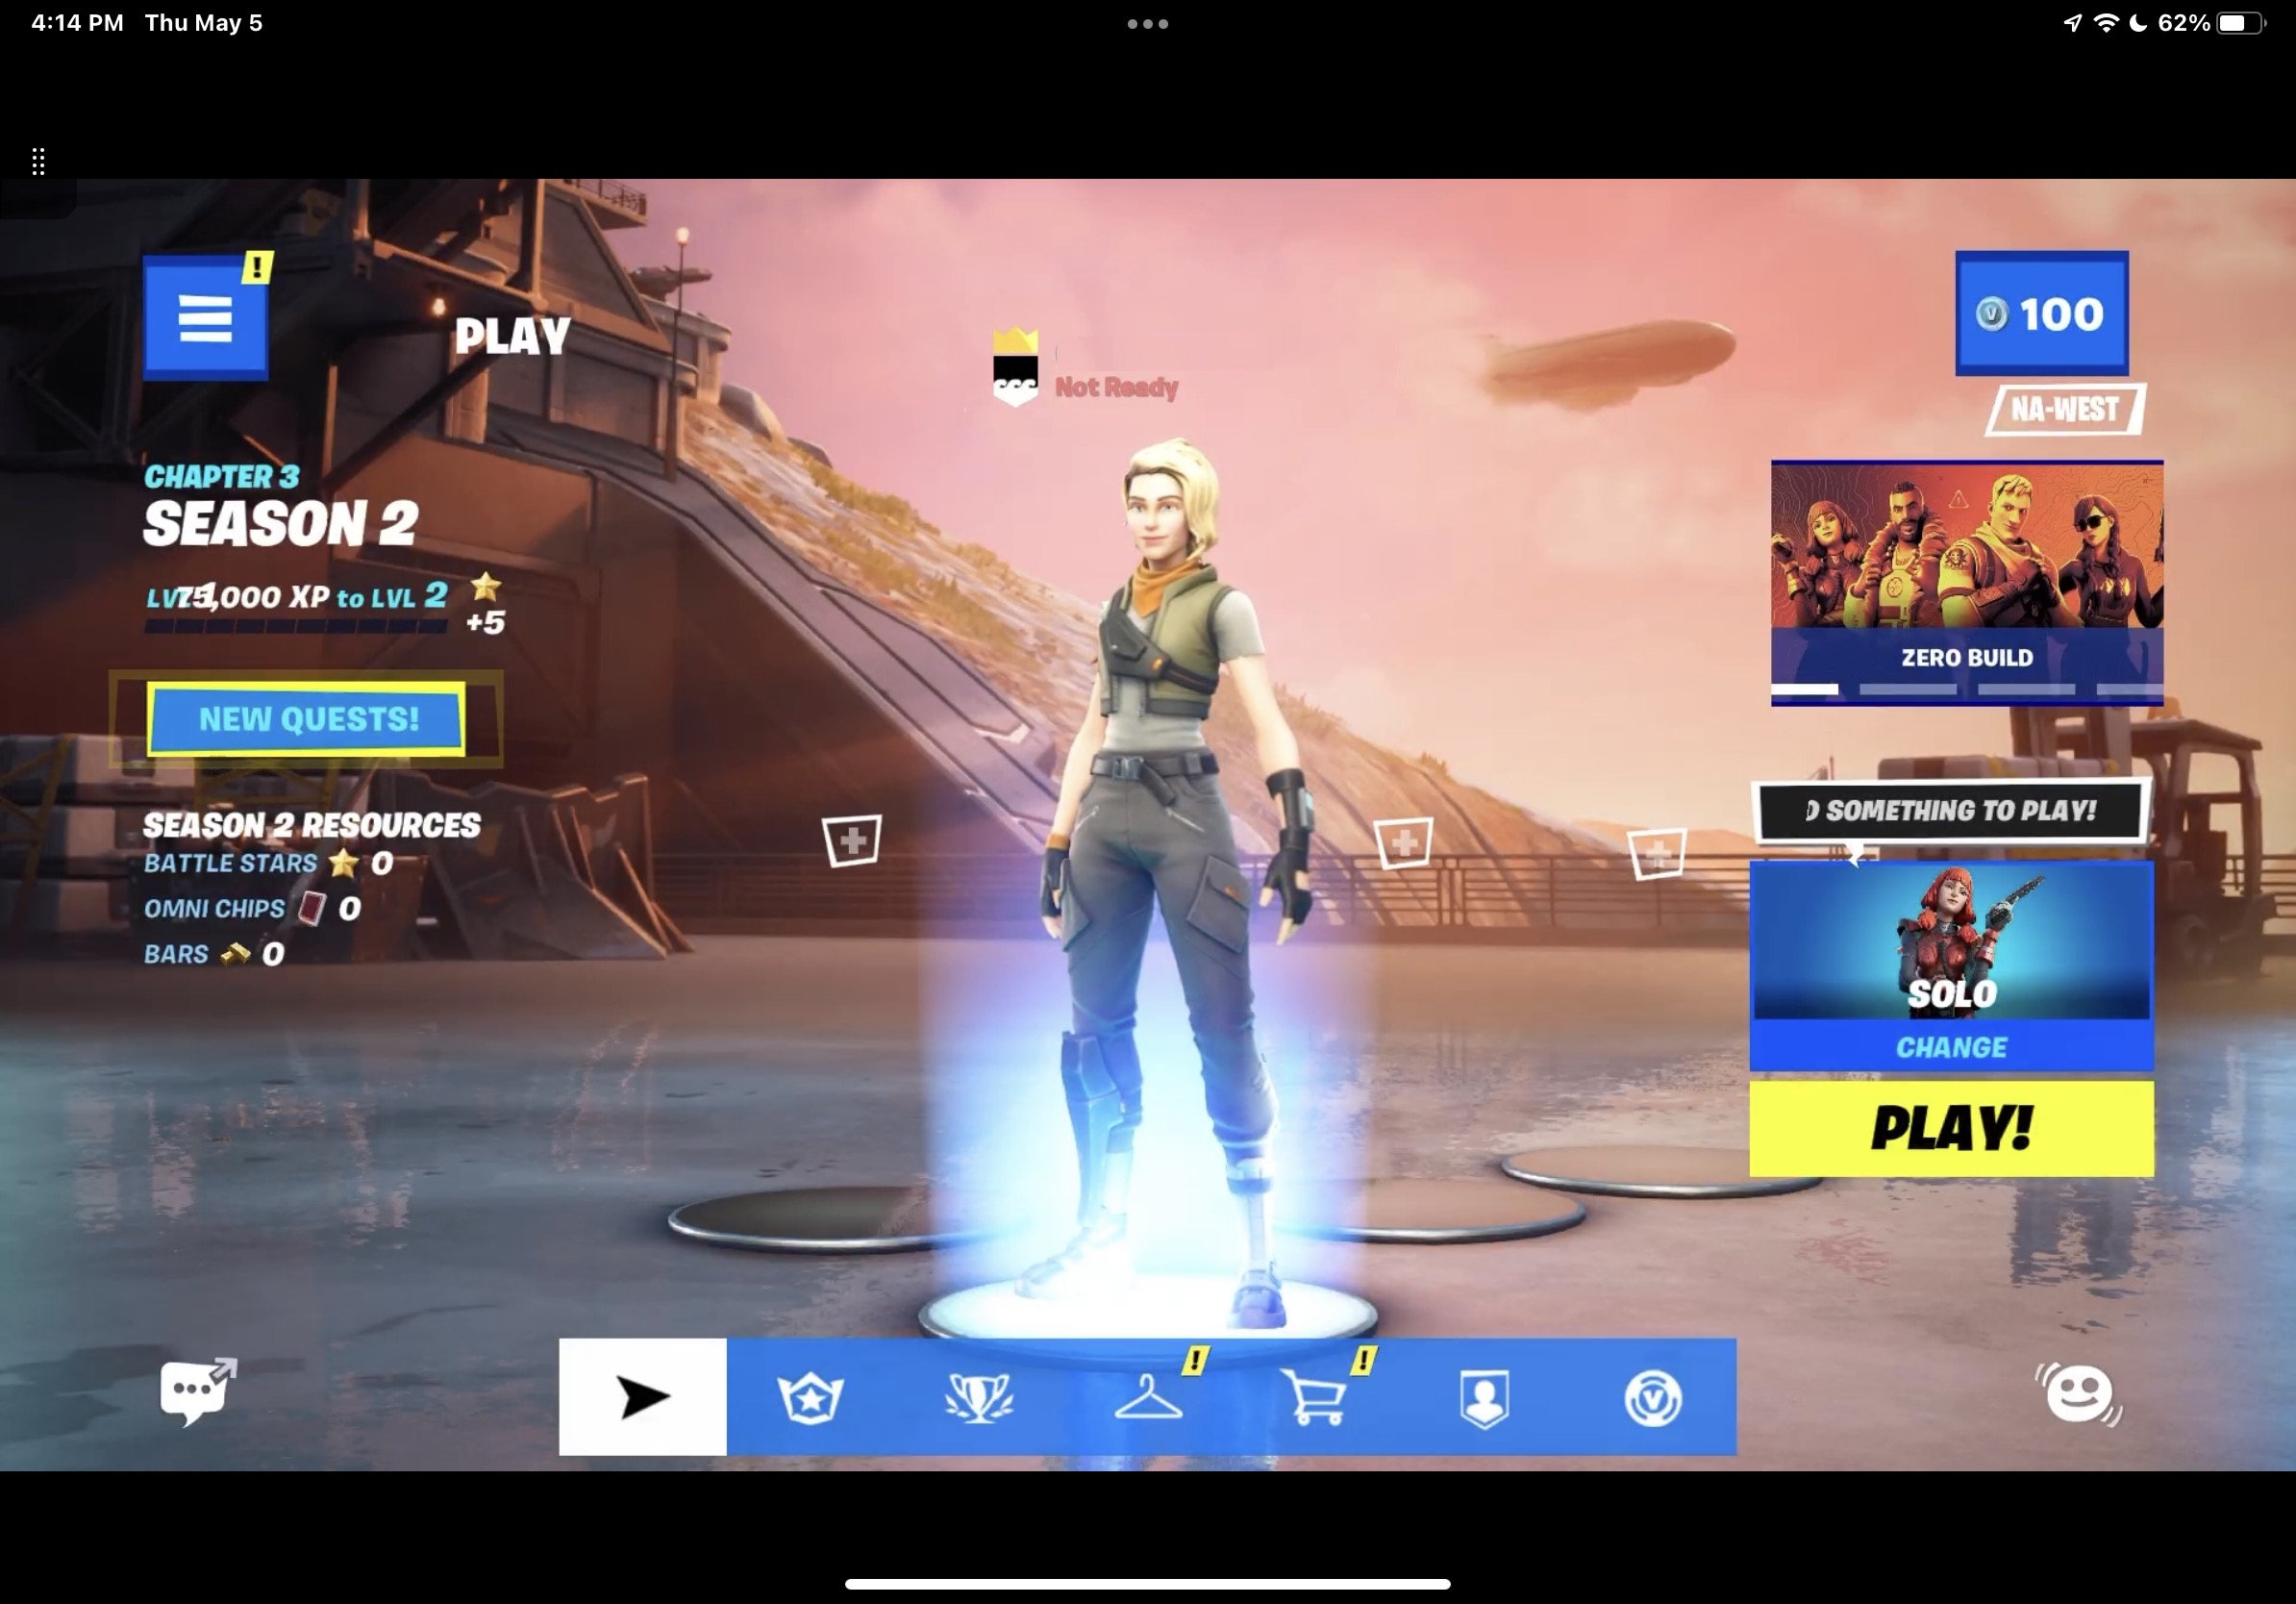 How to play Fortnite with Xbox Cloud Gaming